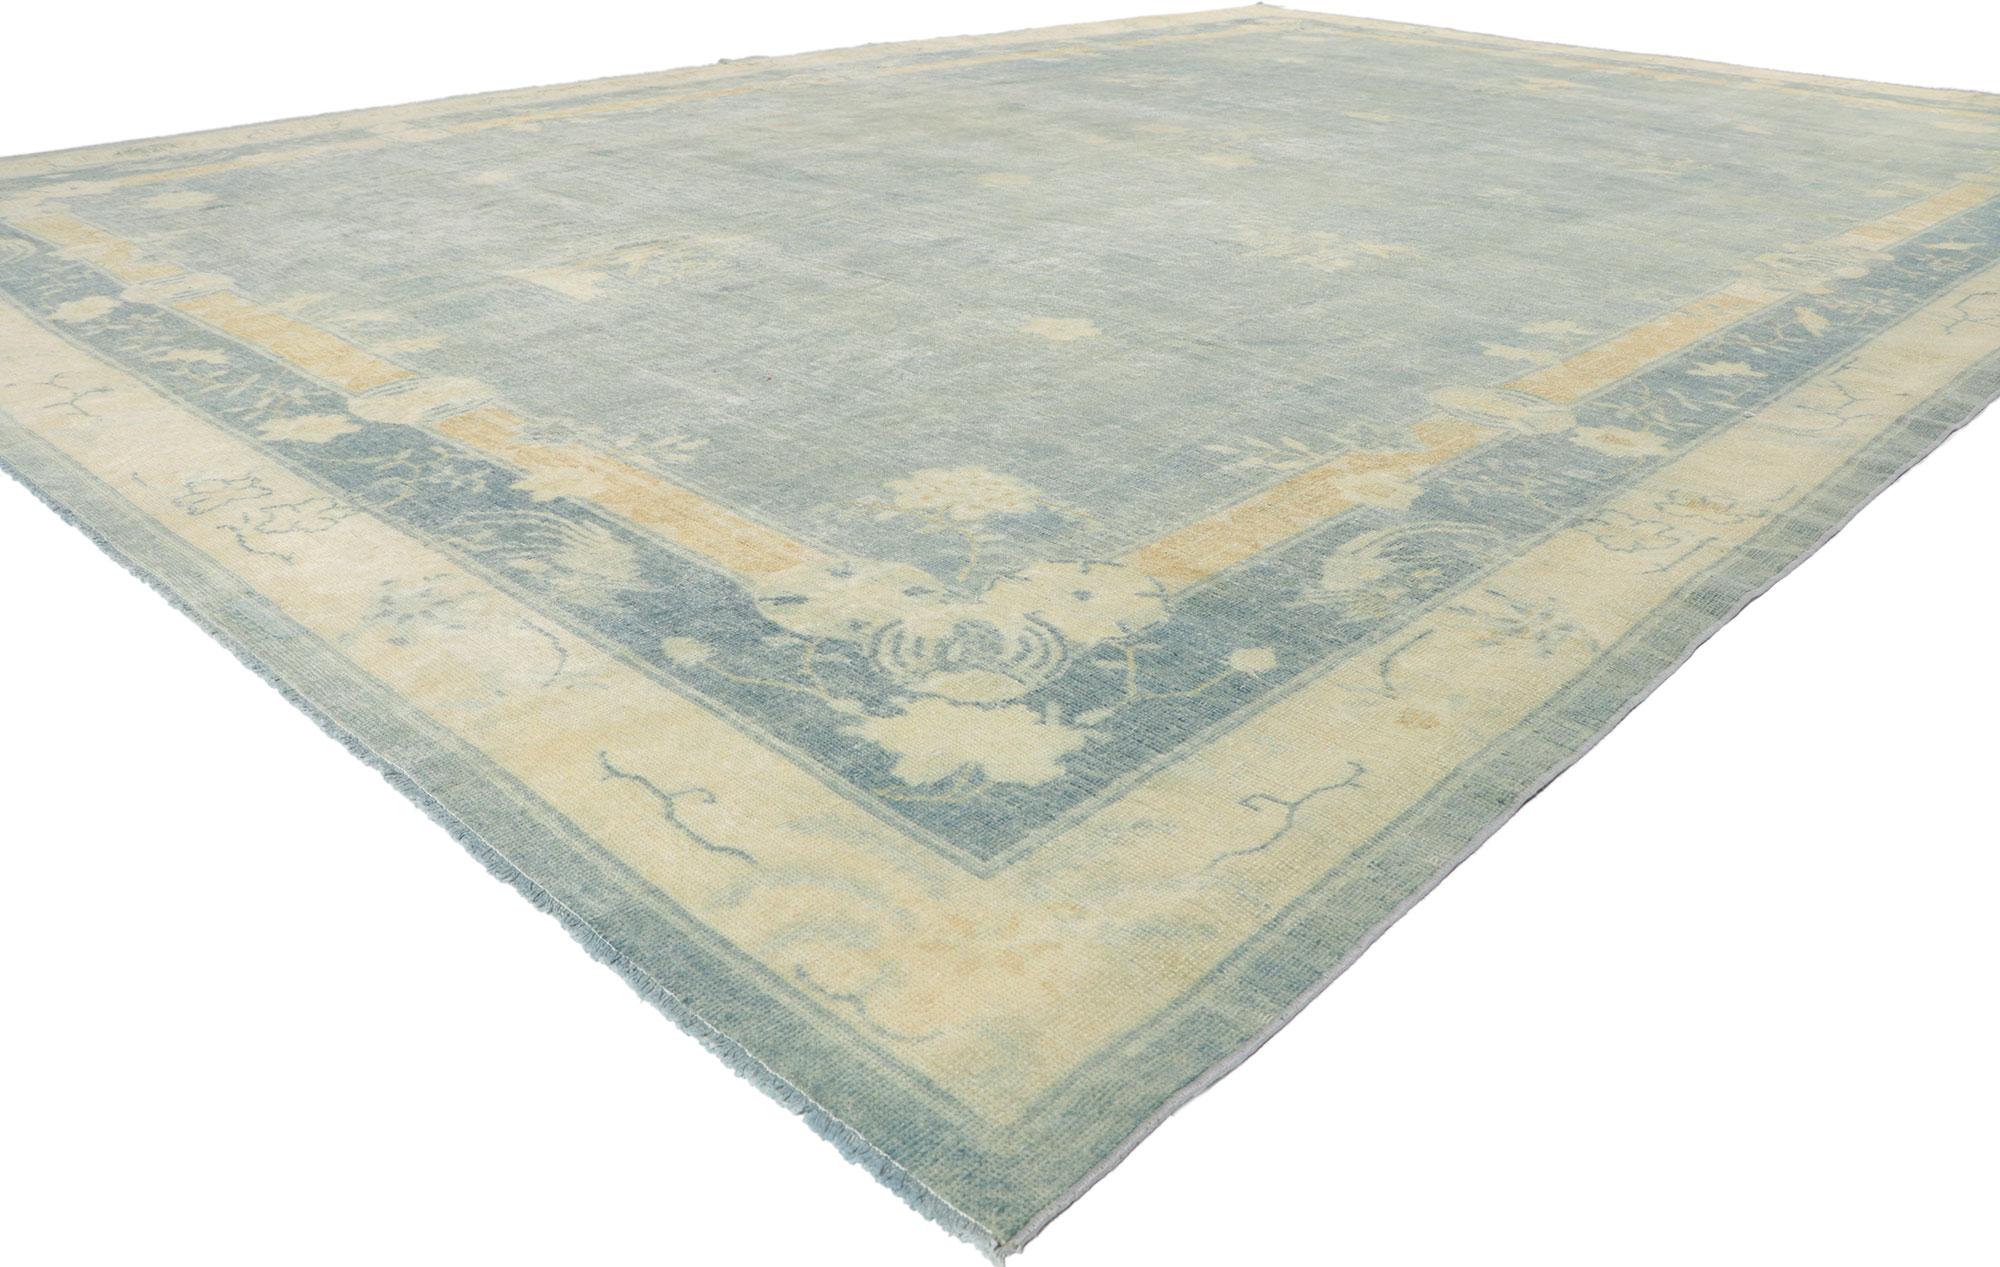 53820 Antique Chinese Peking Rug, 10'05 x 14'09. 
Chinoiserie chic meets quiet sophistication in this hand knotted wool distressed antique Chinese Peking rug. Let yourself be whisked away on an enchanting journey, as you step onto this mesmerizing